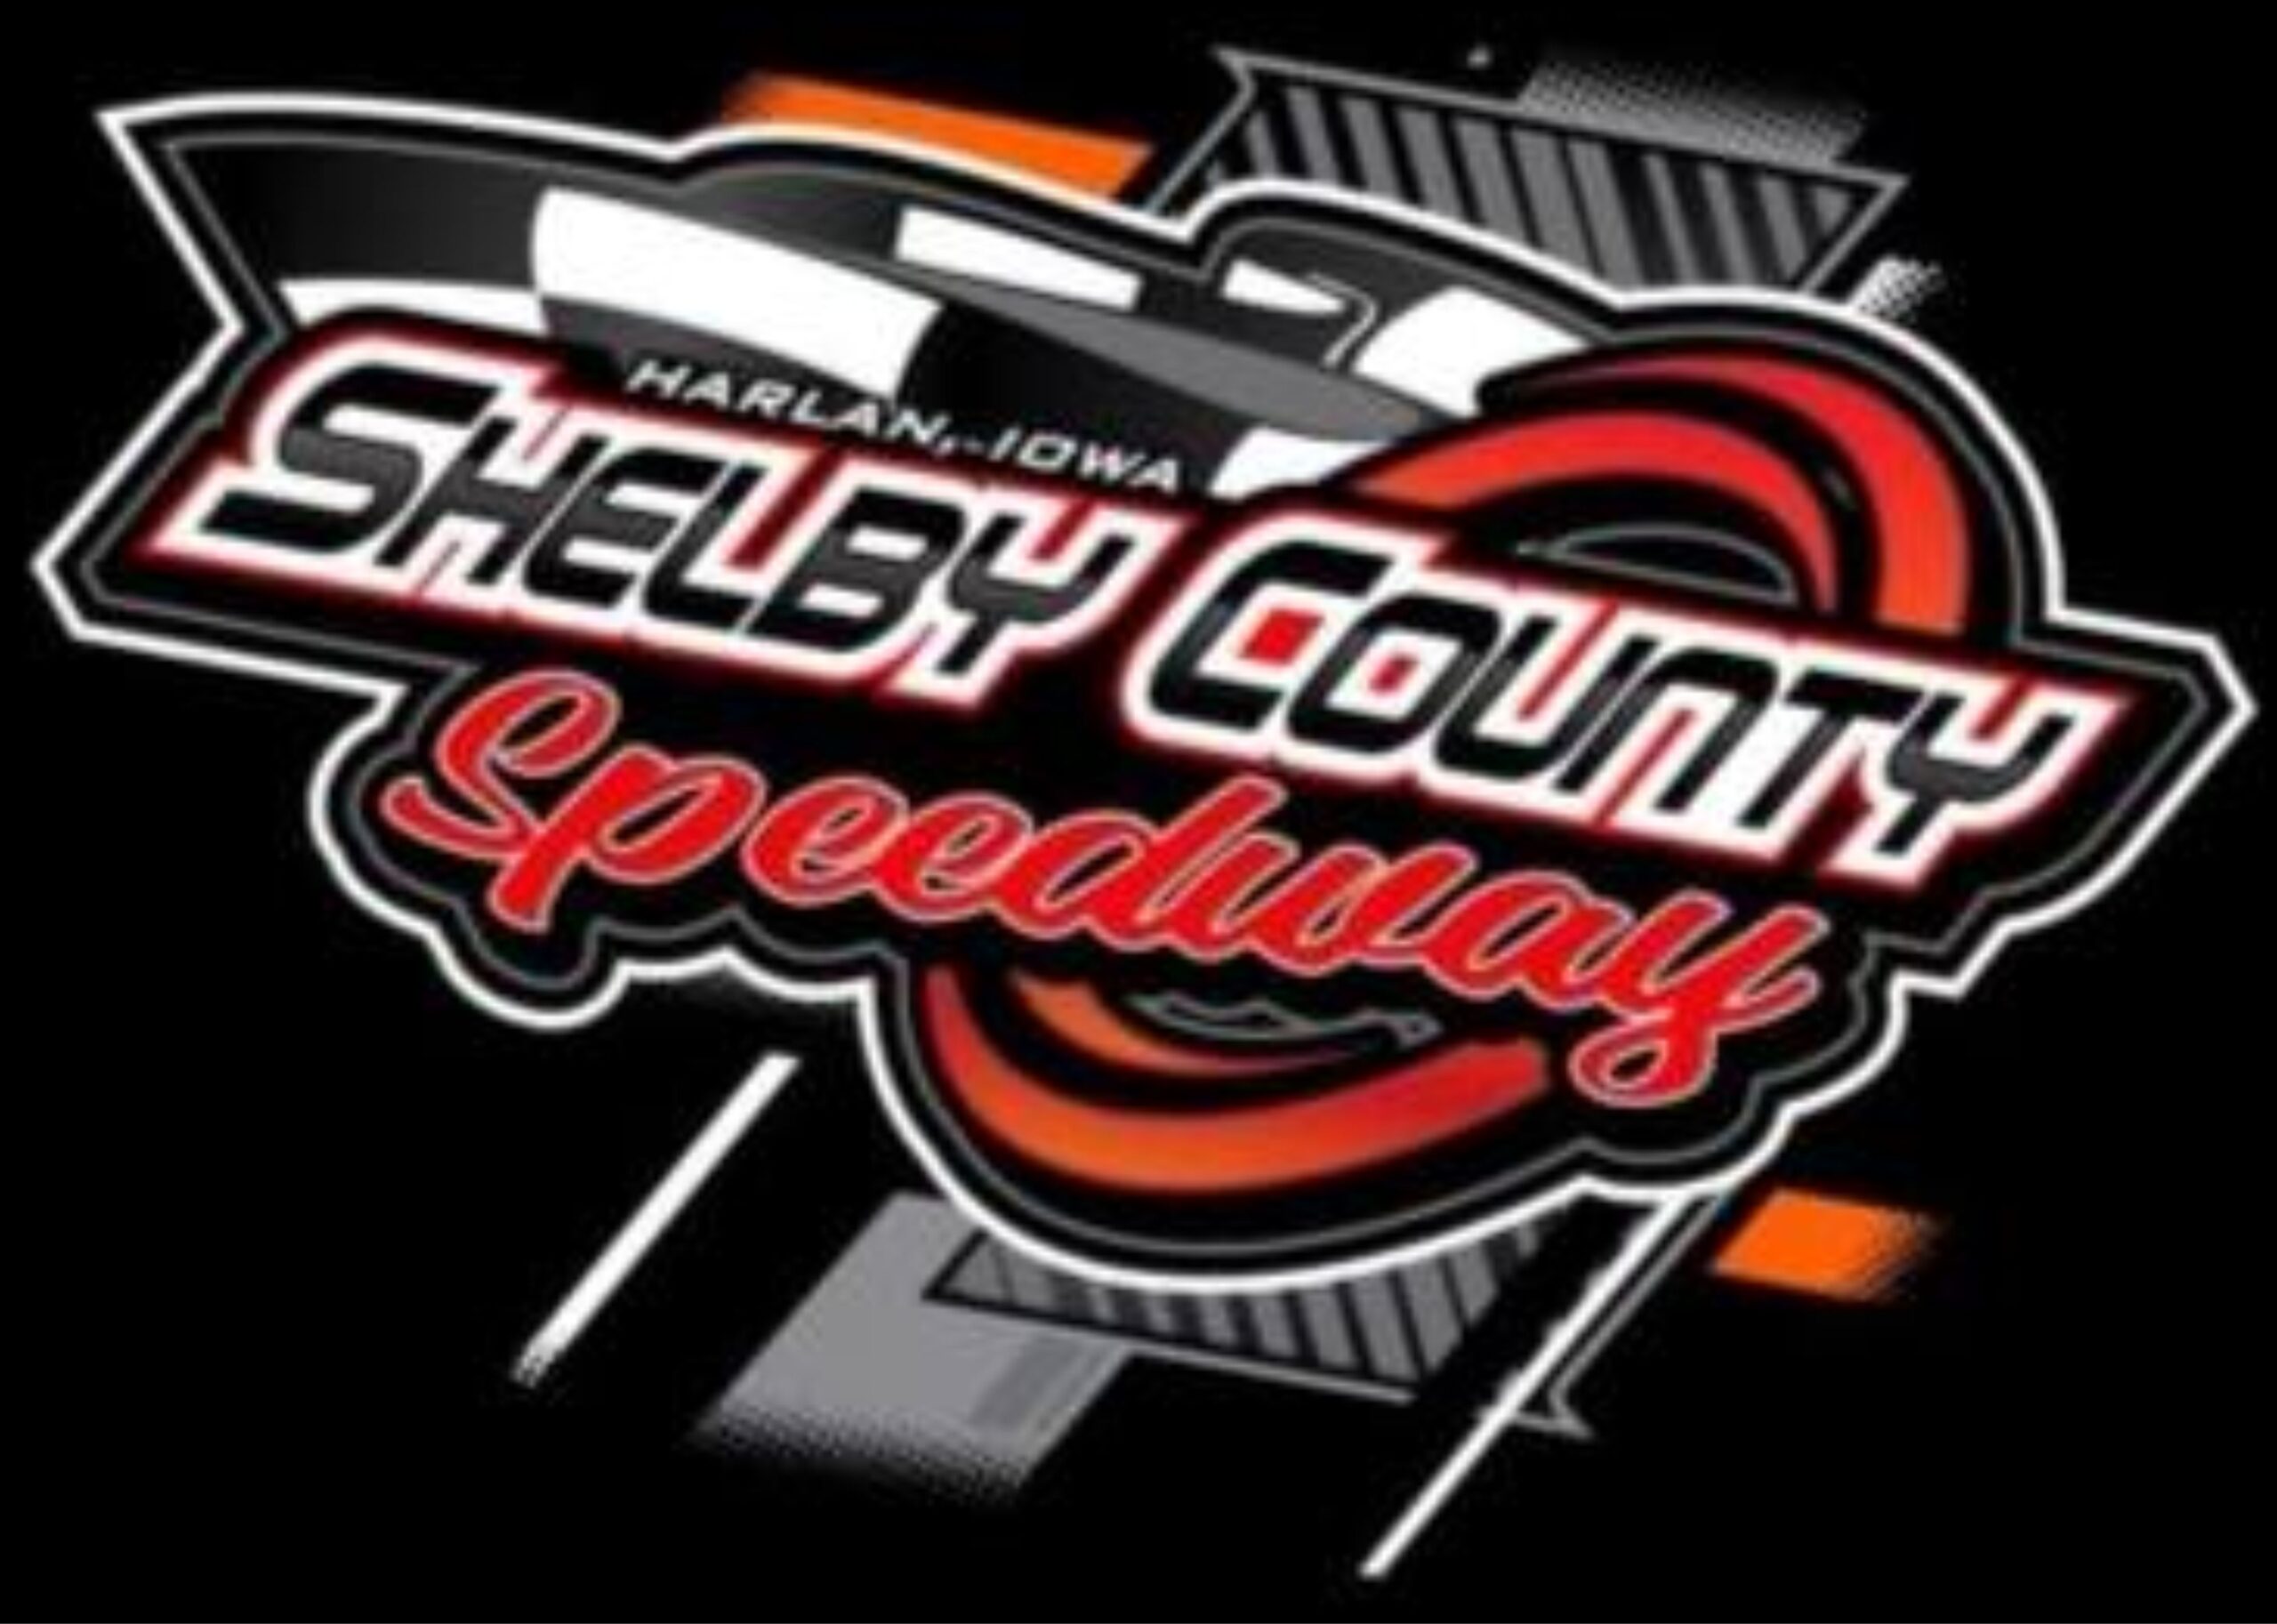 Shelby County Speedway - WEST Championship